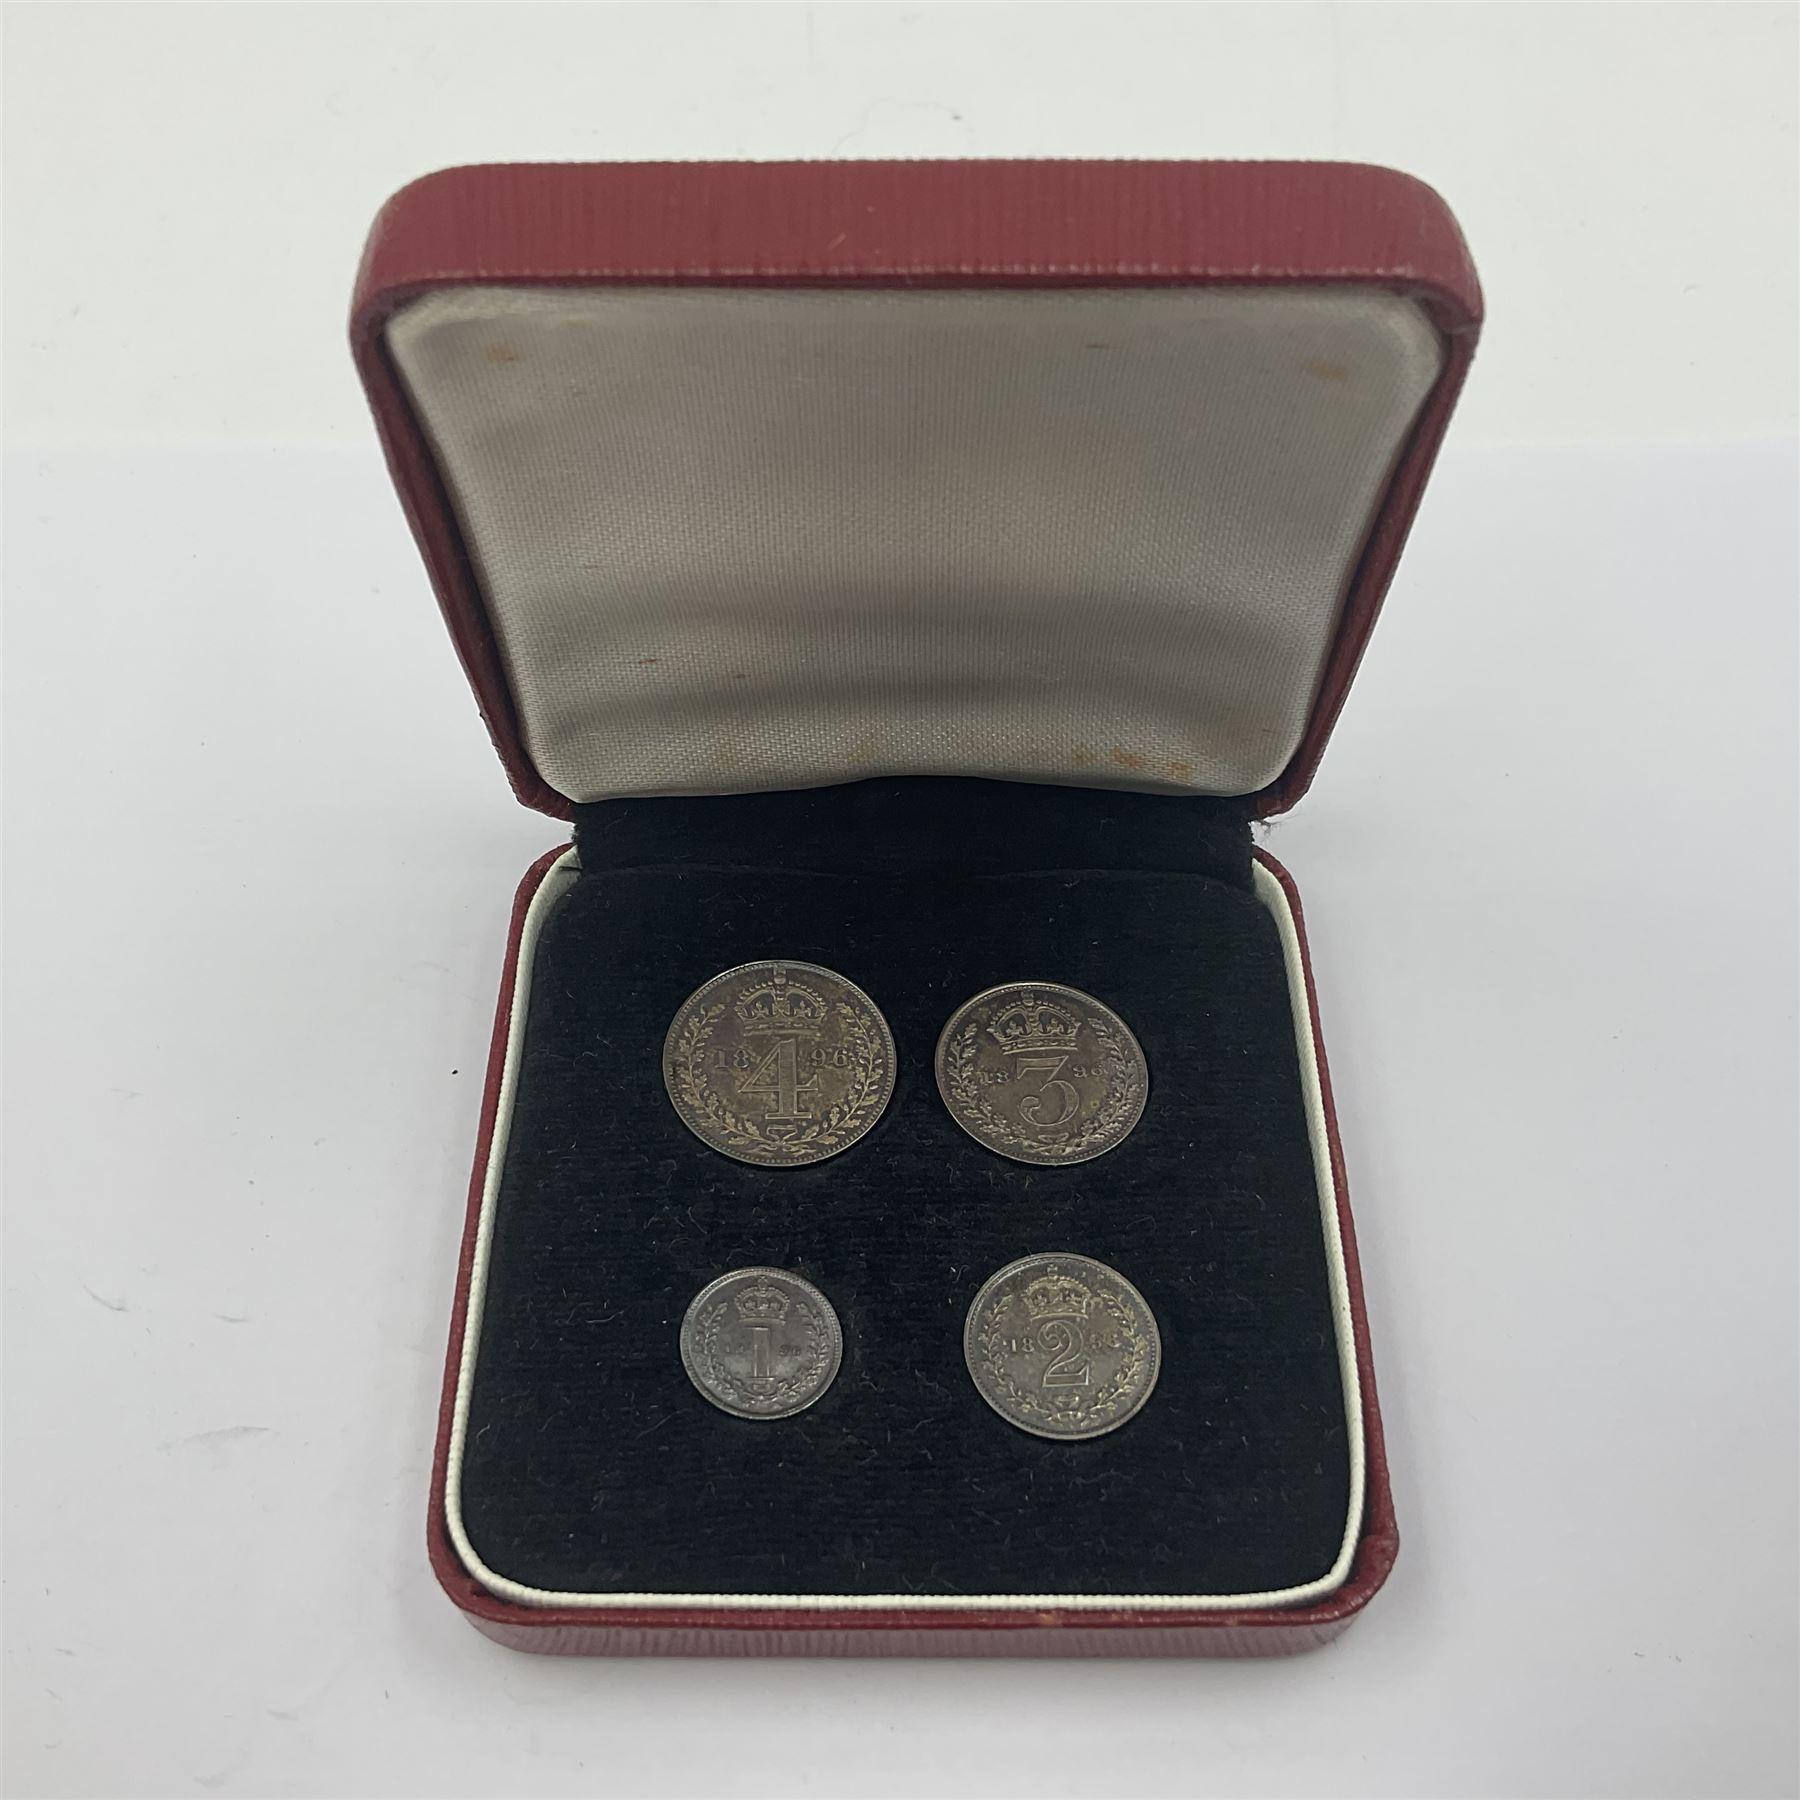 Queen Victoria 1896 maundy coin set - Image 2 of 3